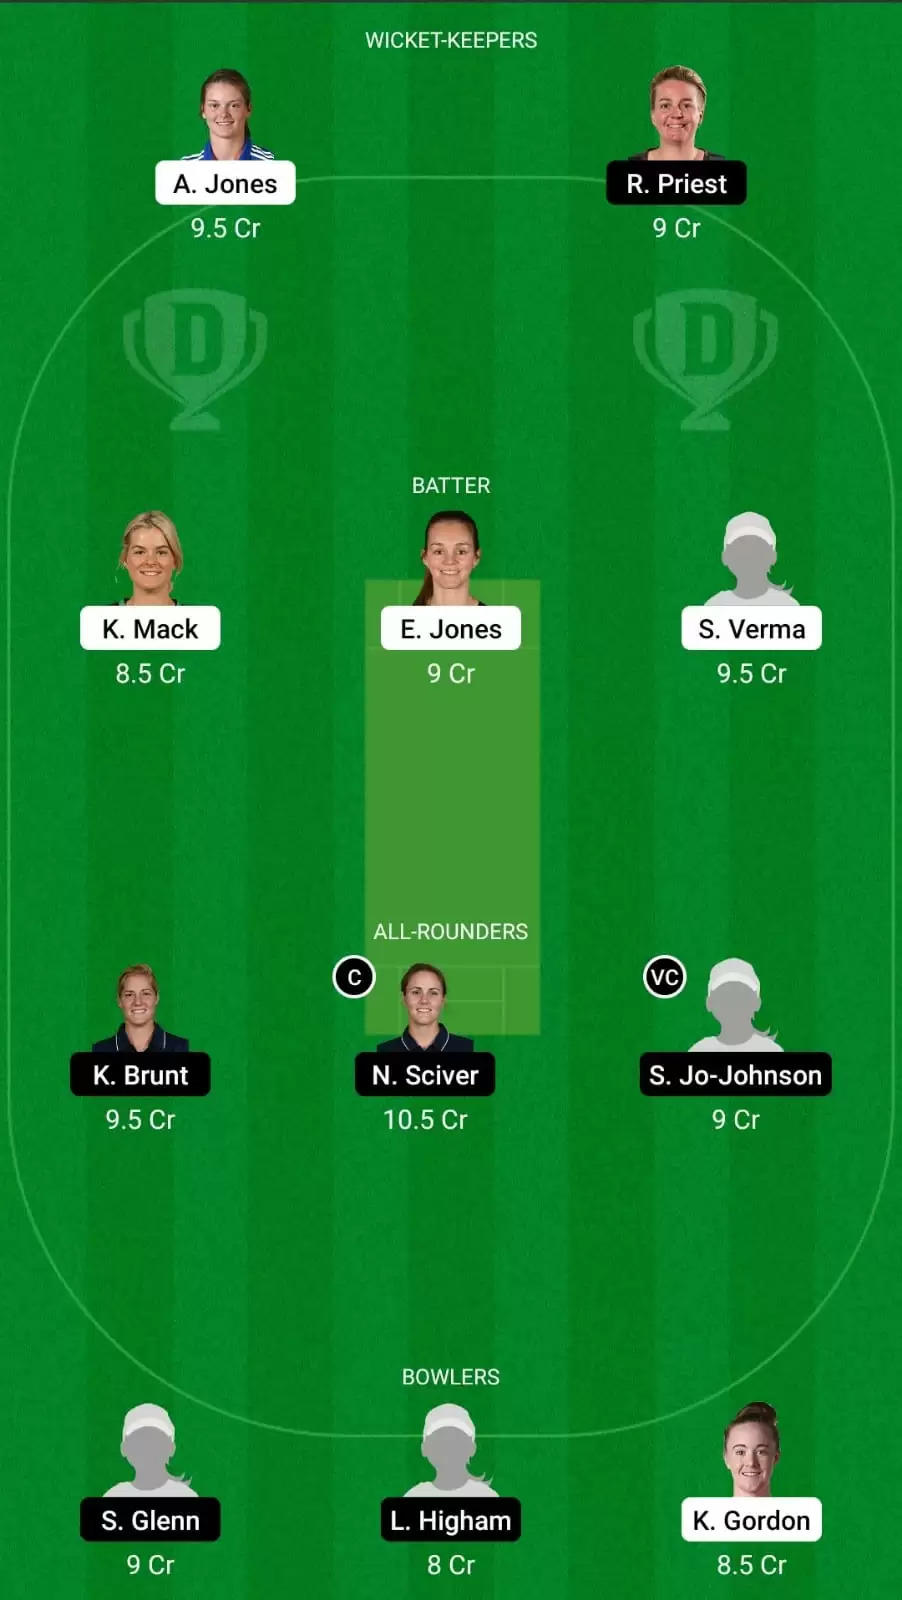 BPH-W vs TRT-W Dream11 Prediction for The Hundred Women’s 2021: Birmingham Phoenix Women vs Trent Rockets Women Best Fantasy Cricket Tips, Strongest Playing XI, Pitch Report and Player Updates